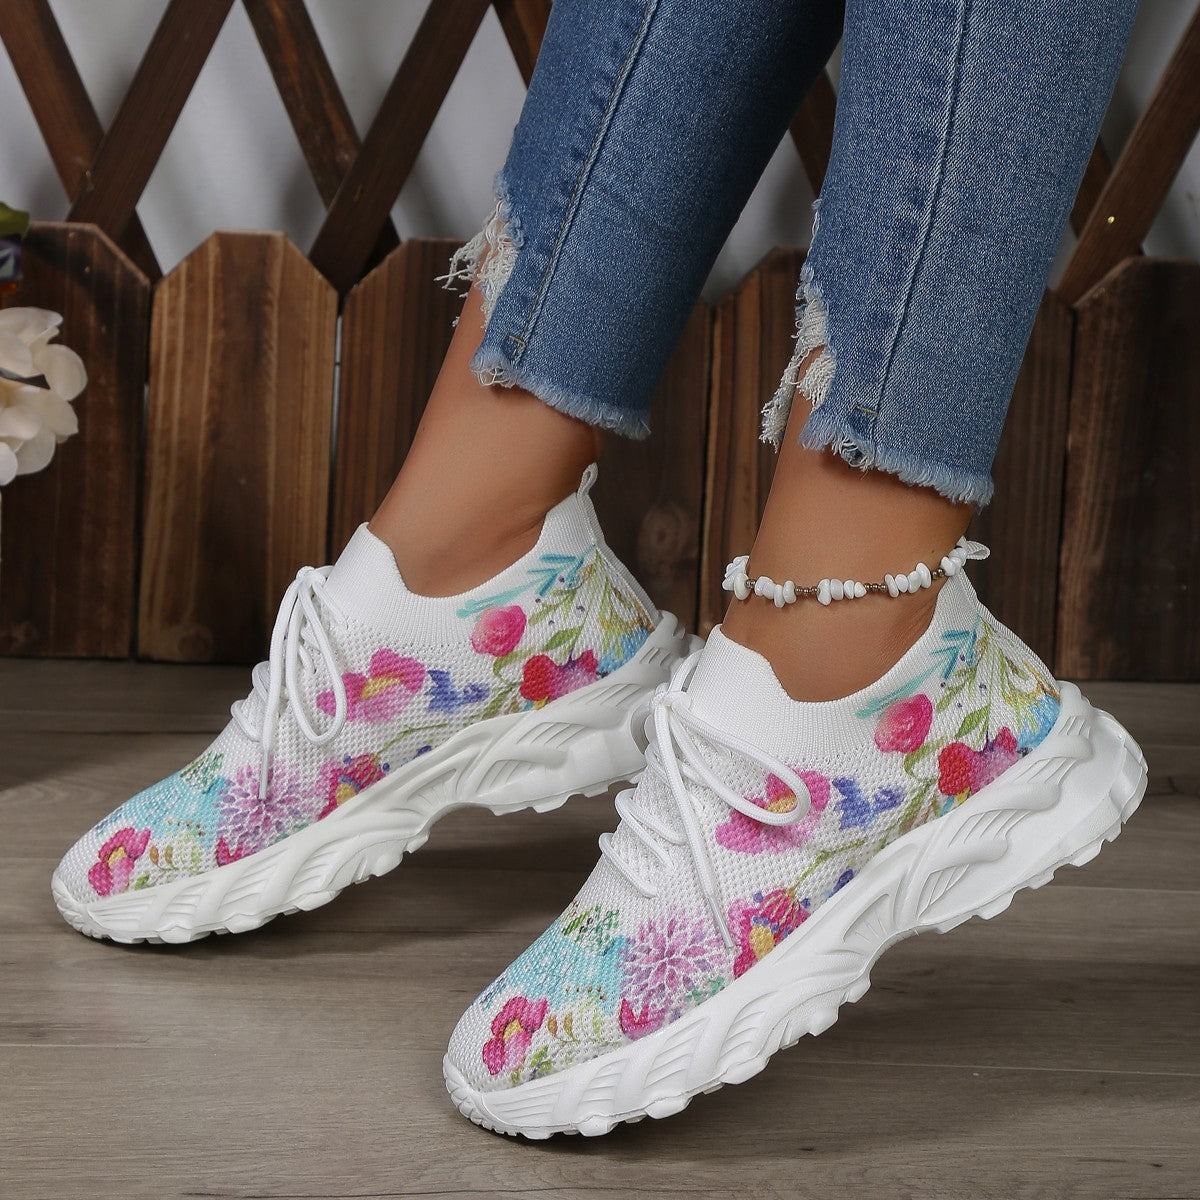 
                  
                    Women's Sports Shoes Flowers Print Walking Sneakers Casual Breathable Lace-up Mesh Shoes
                  
                